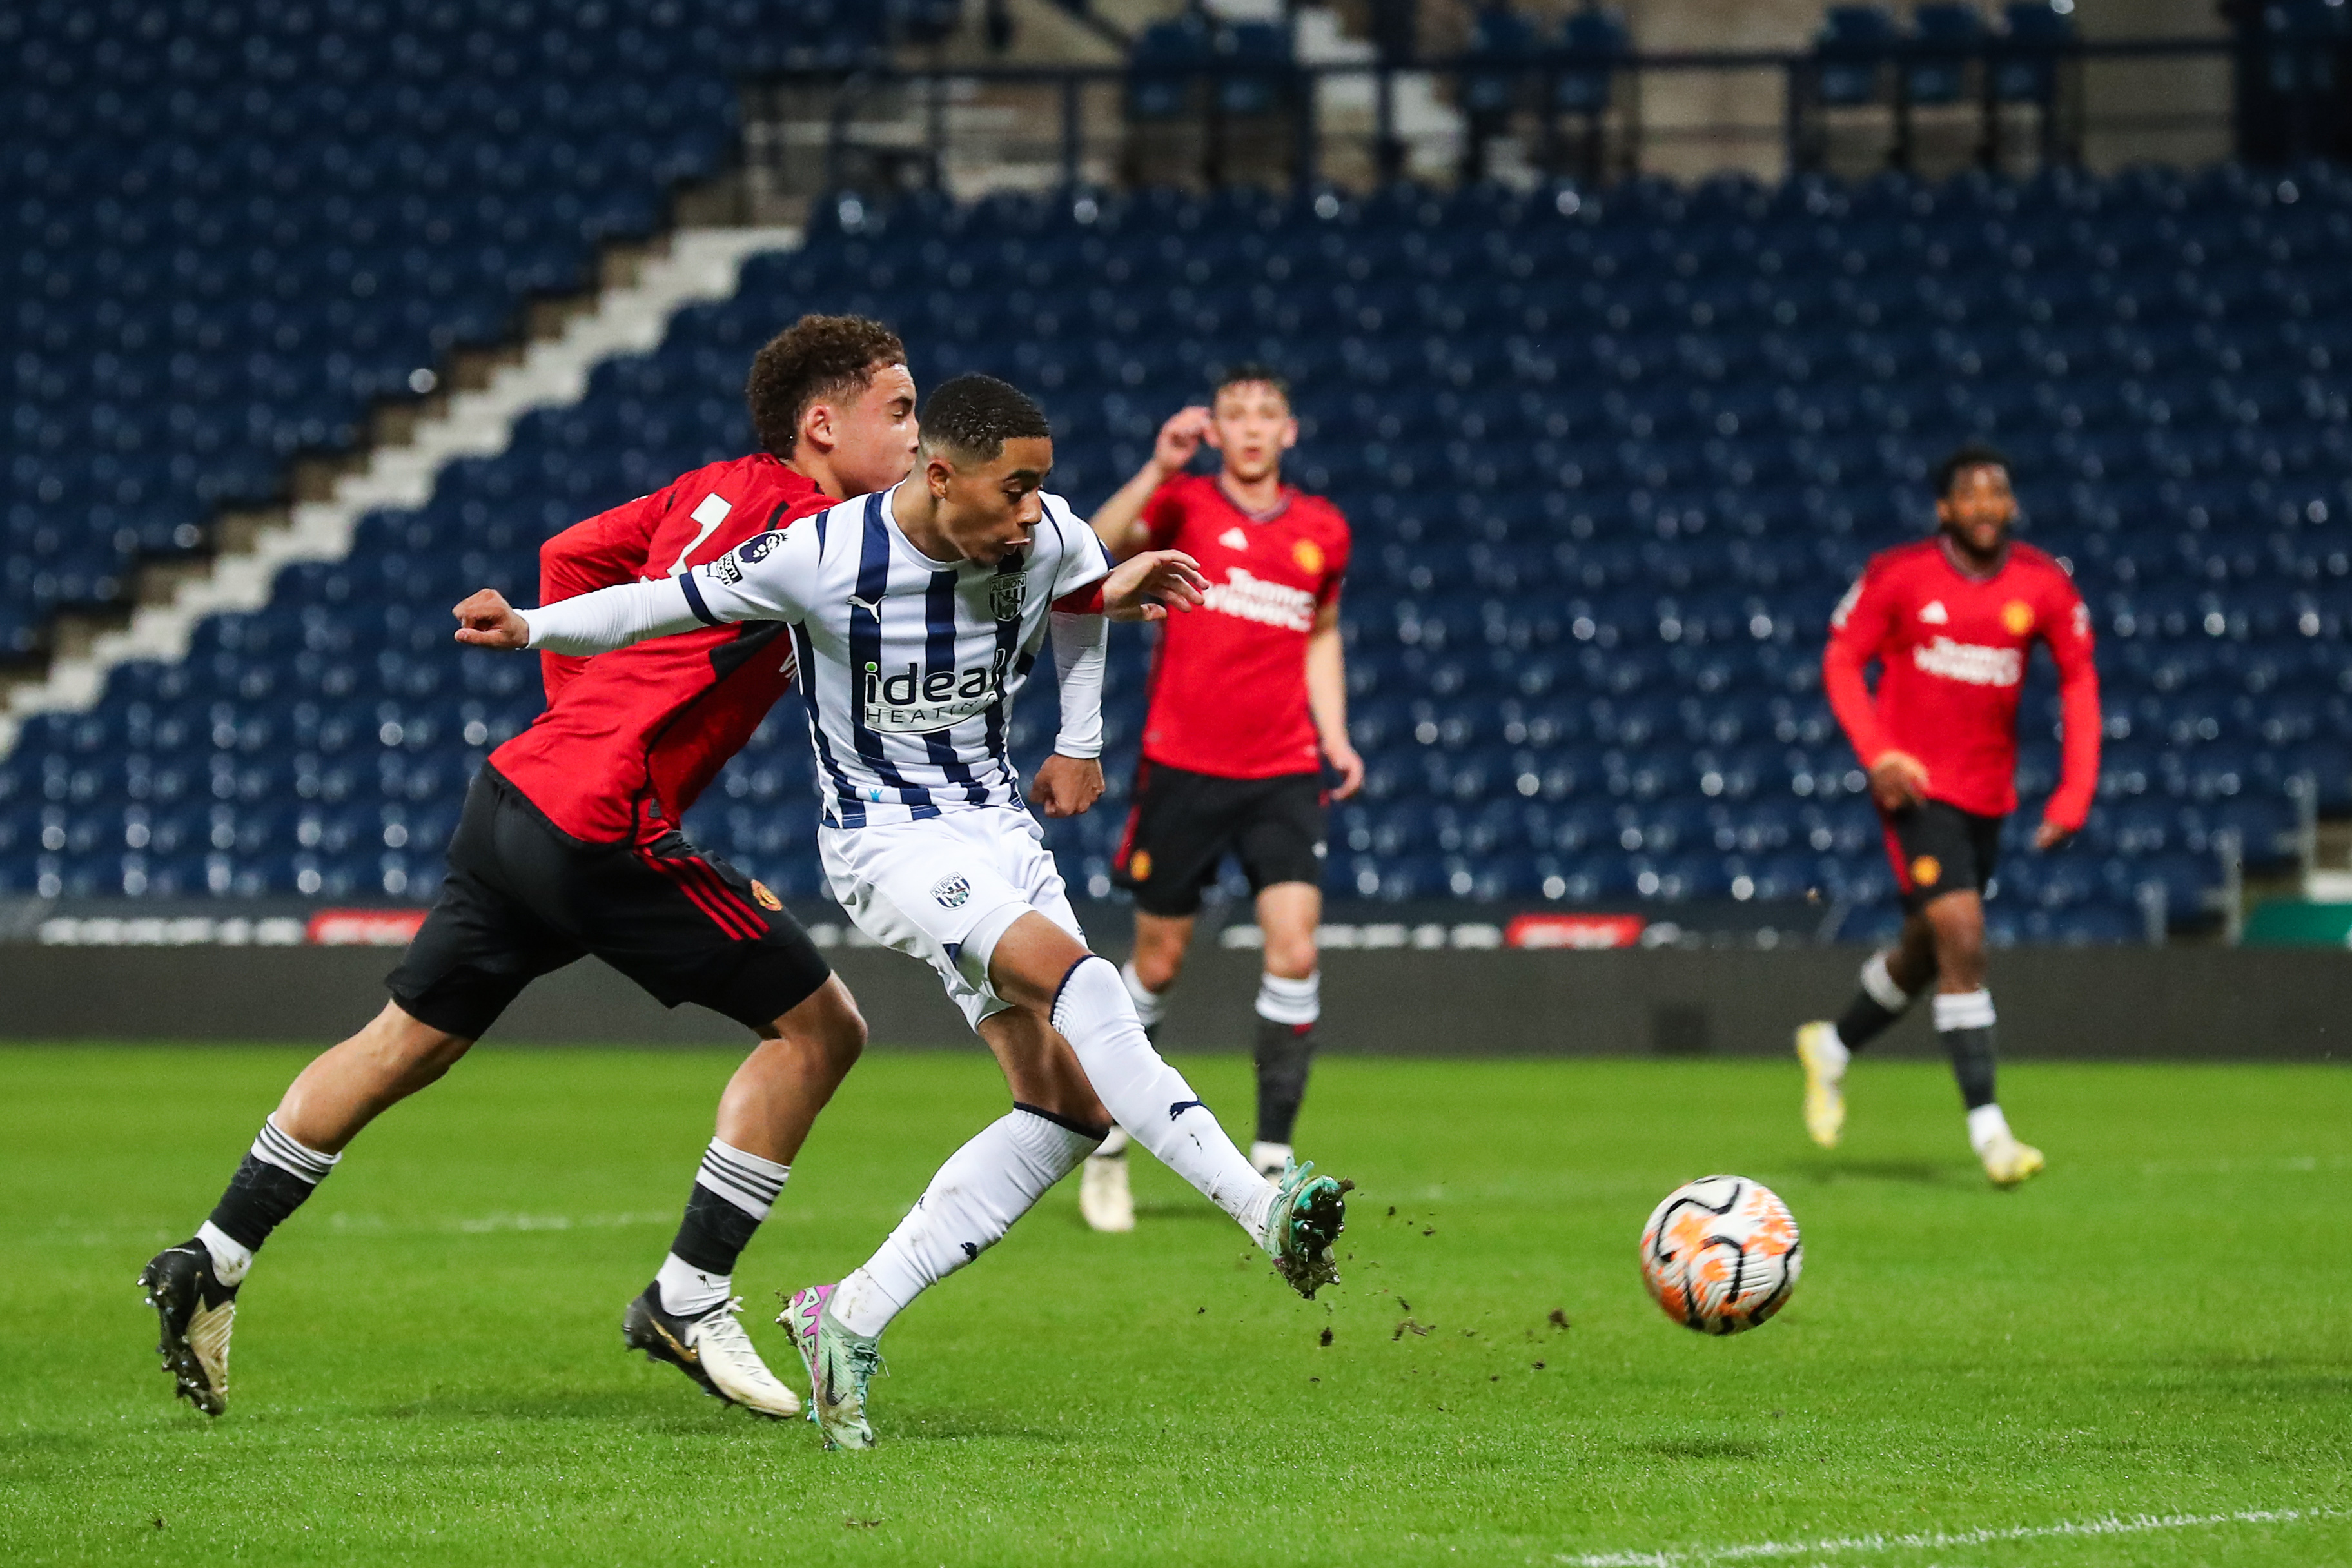 Deago Nelso having a shot against Manchester United during a PL2 clash at The Hawthorns